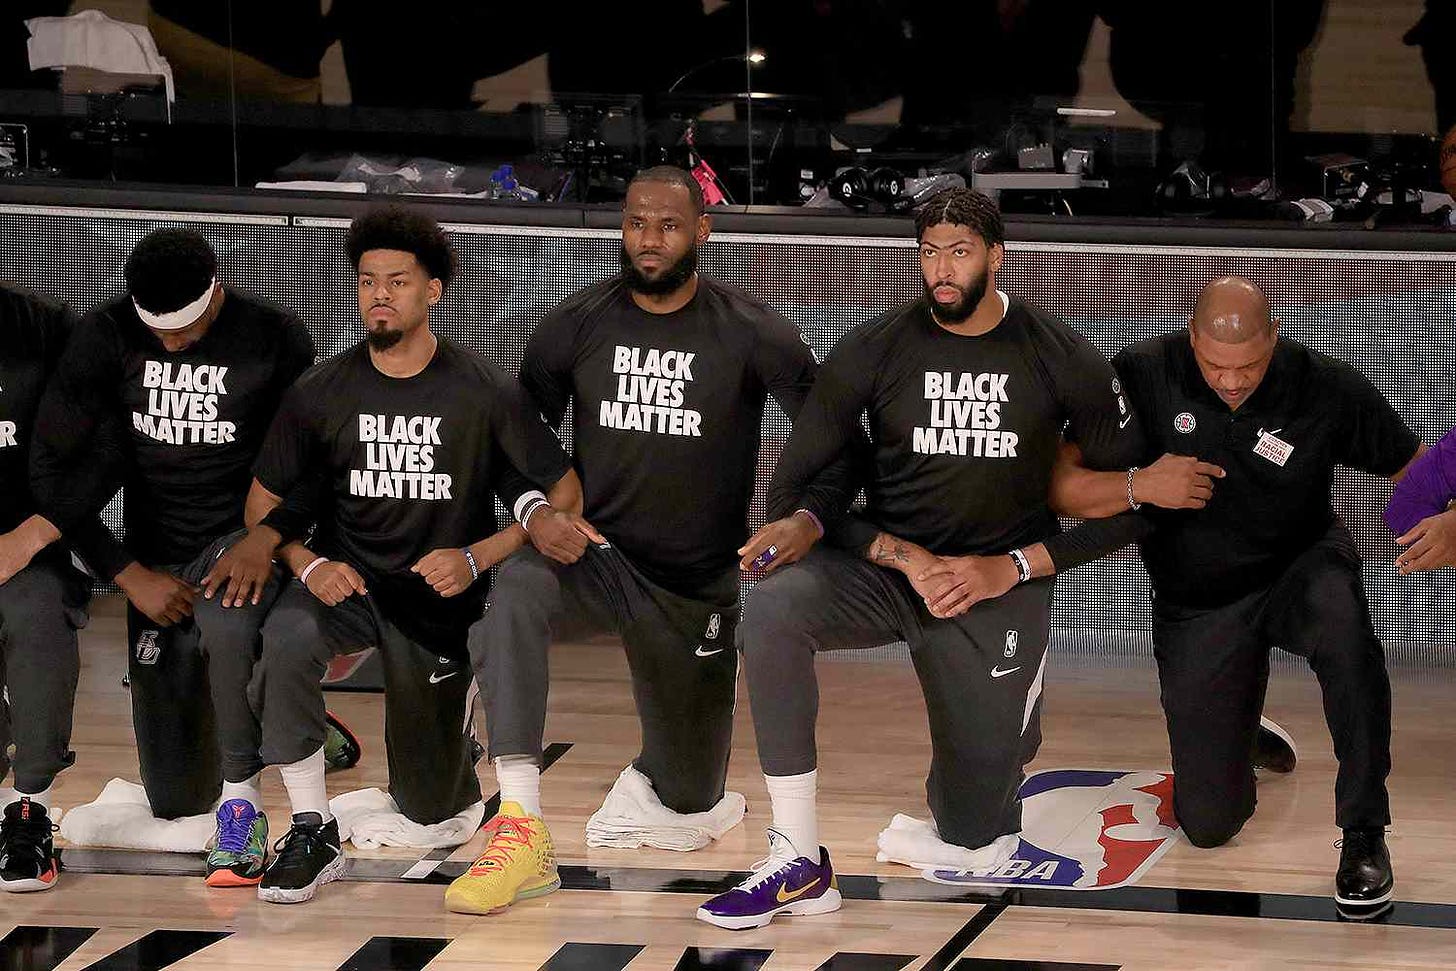 Image result from https://people.com/sports/lebron-james-fellow-nba-players-kneel-for-national-anthem-in-black-lives-matter-shirts/